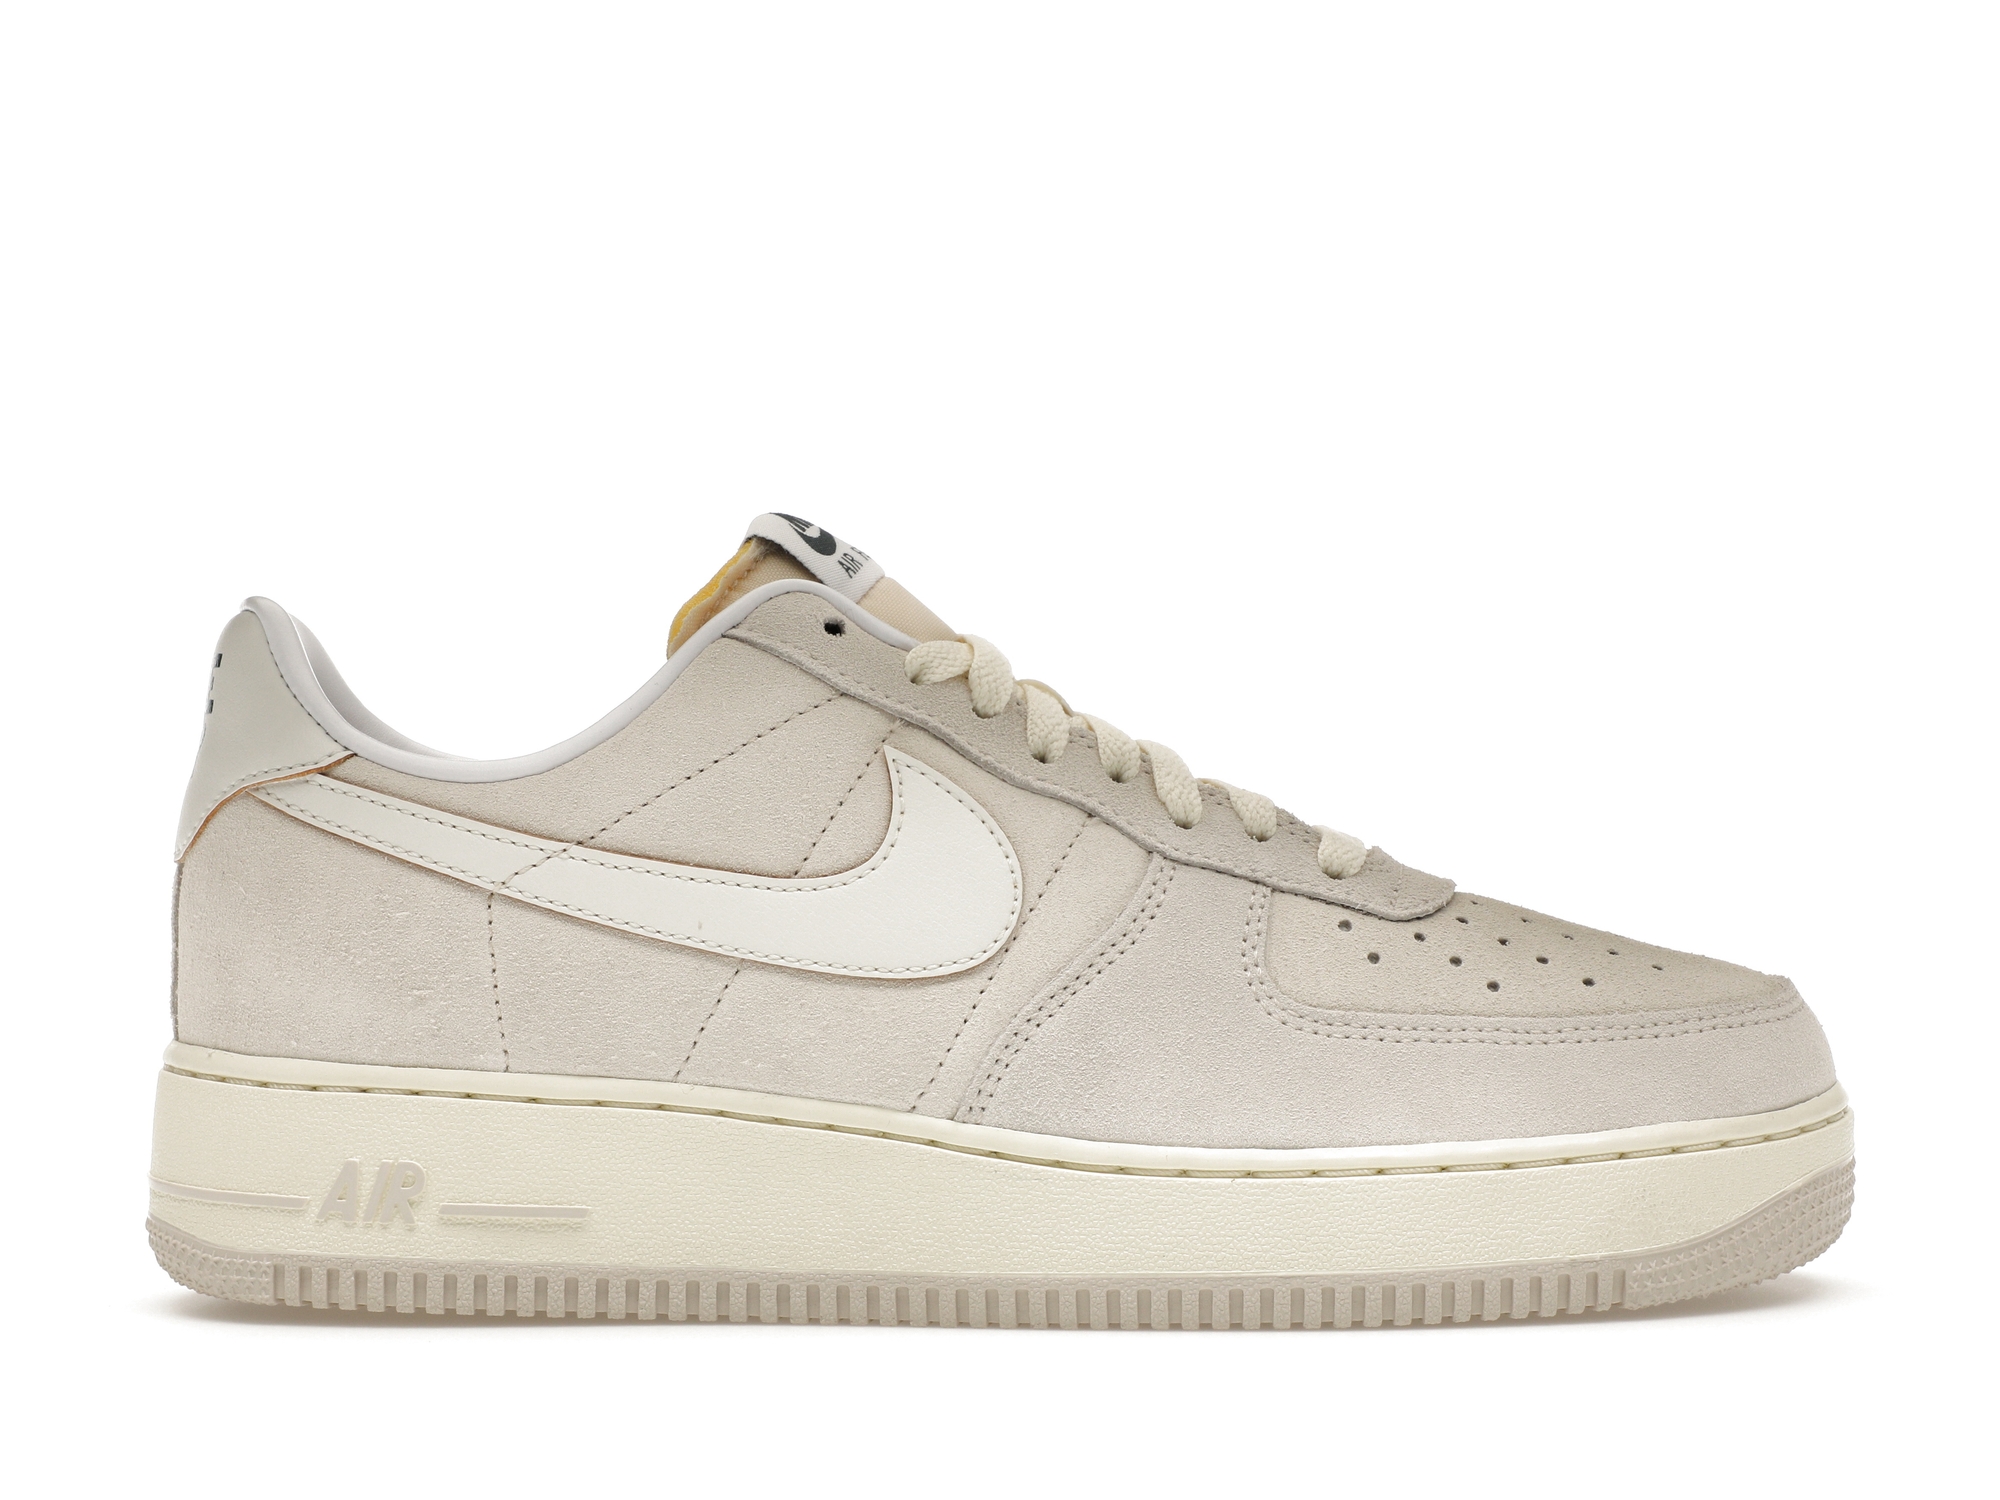 Nike Air Force 1 Low '07 Athletic Department Light Orewood Brown